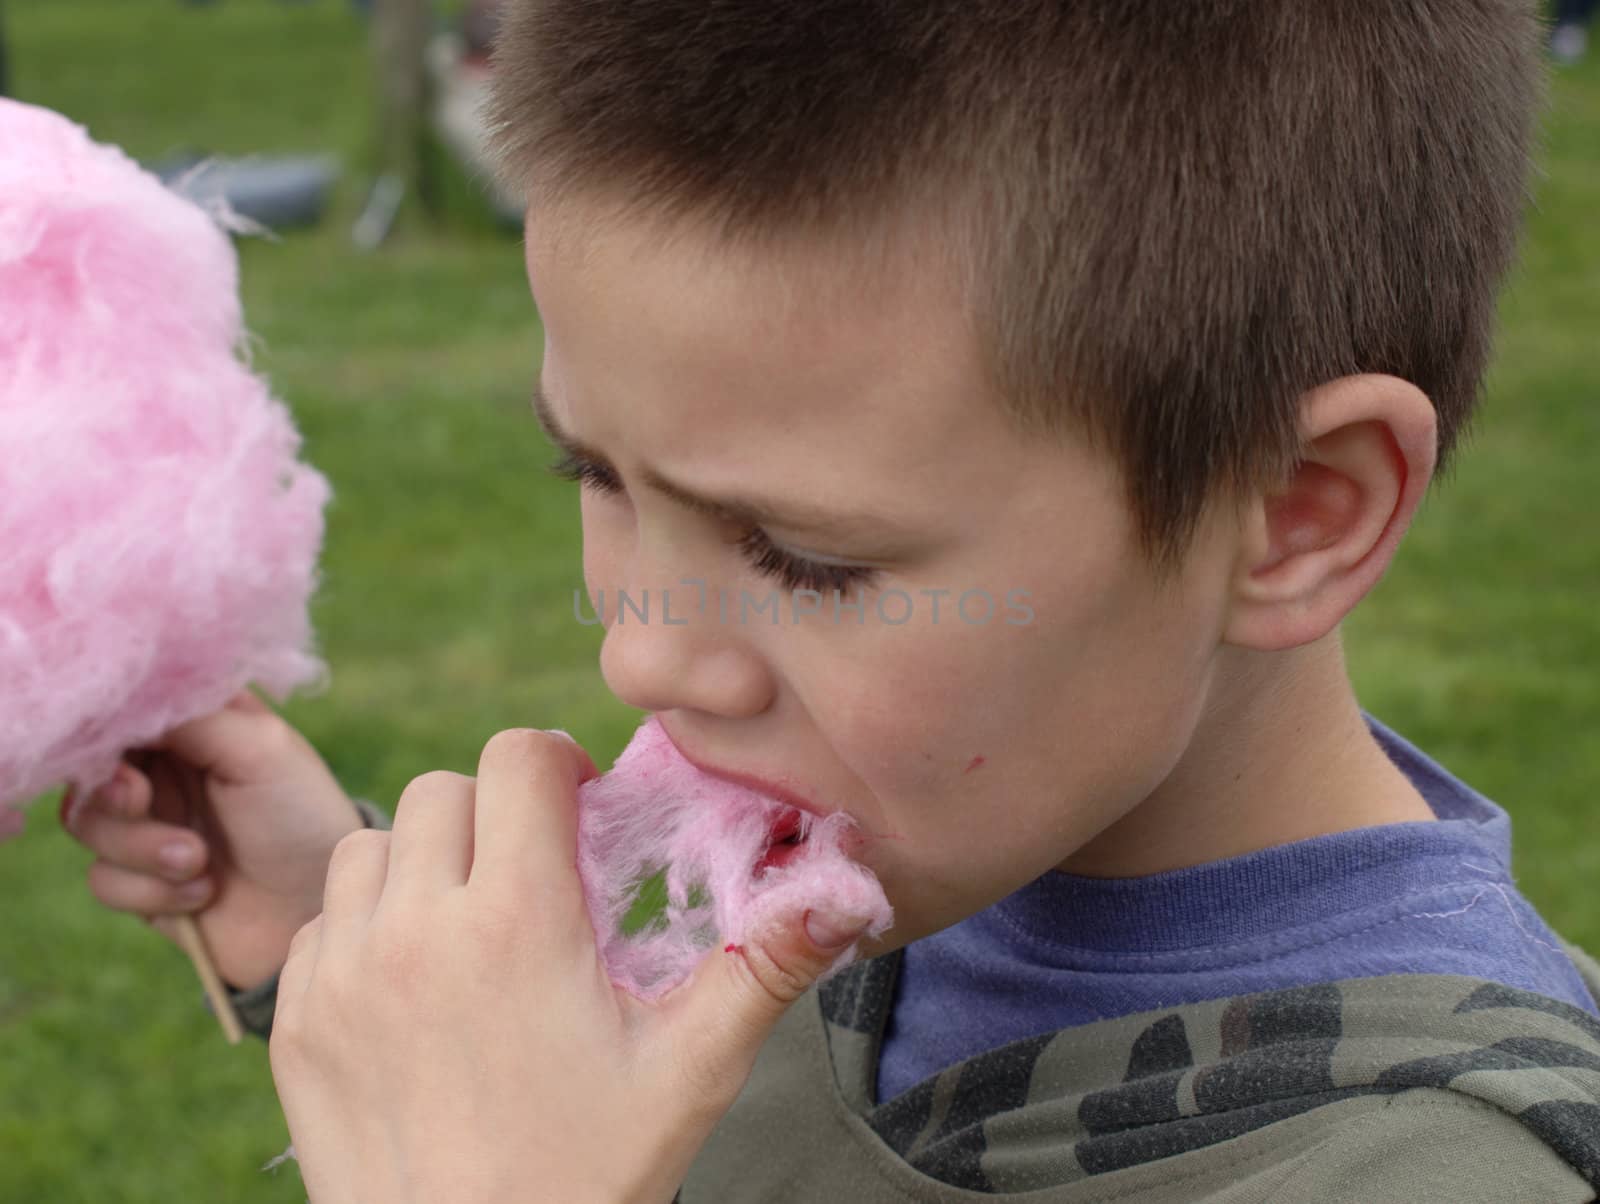 the boy eat the cotton candy